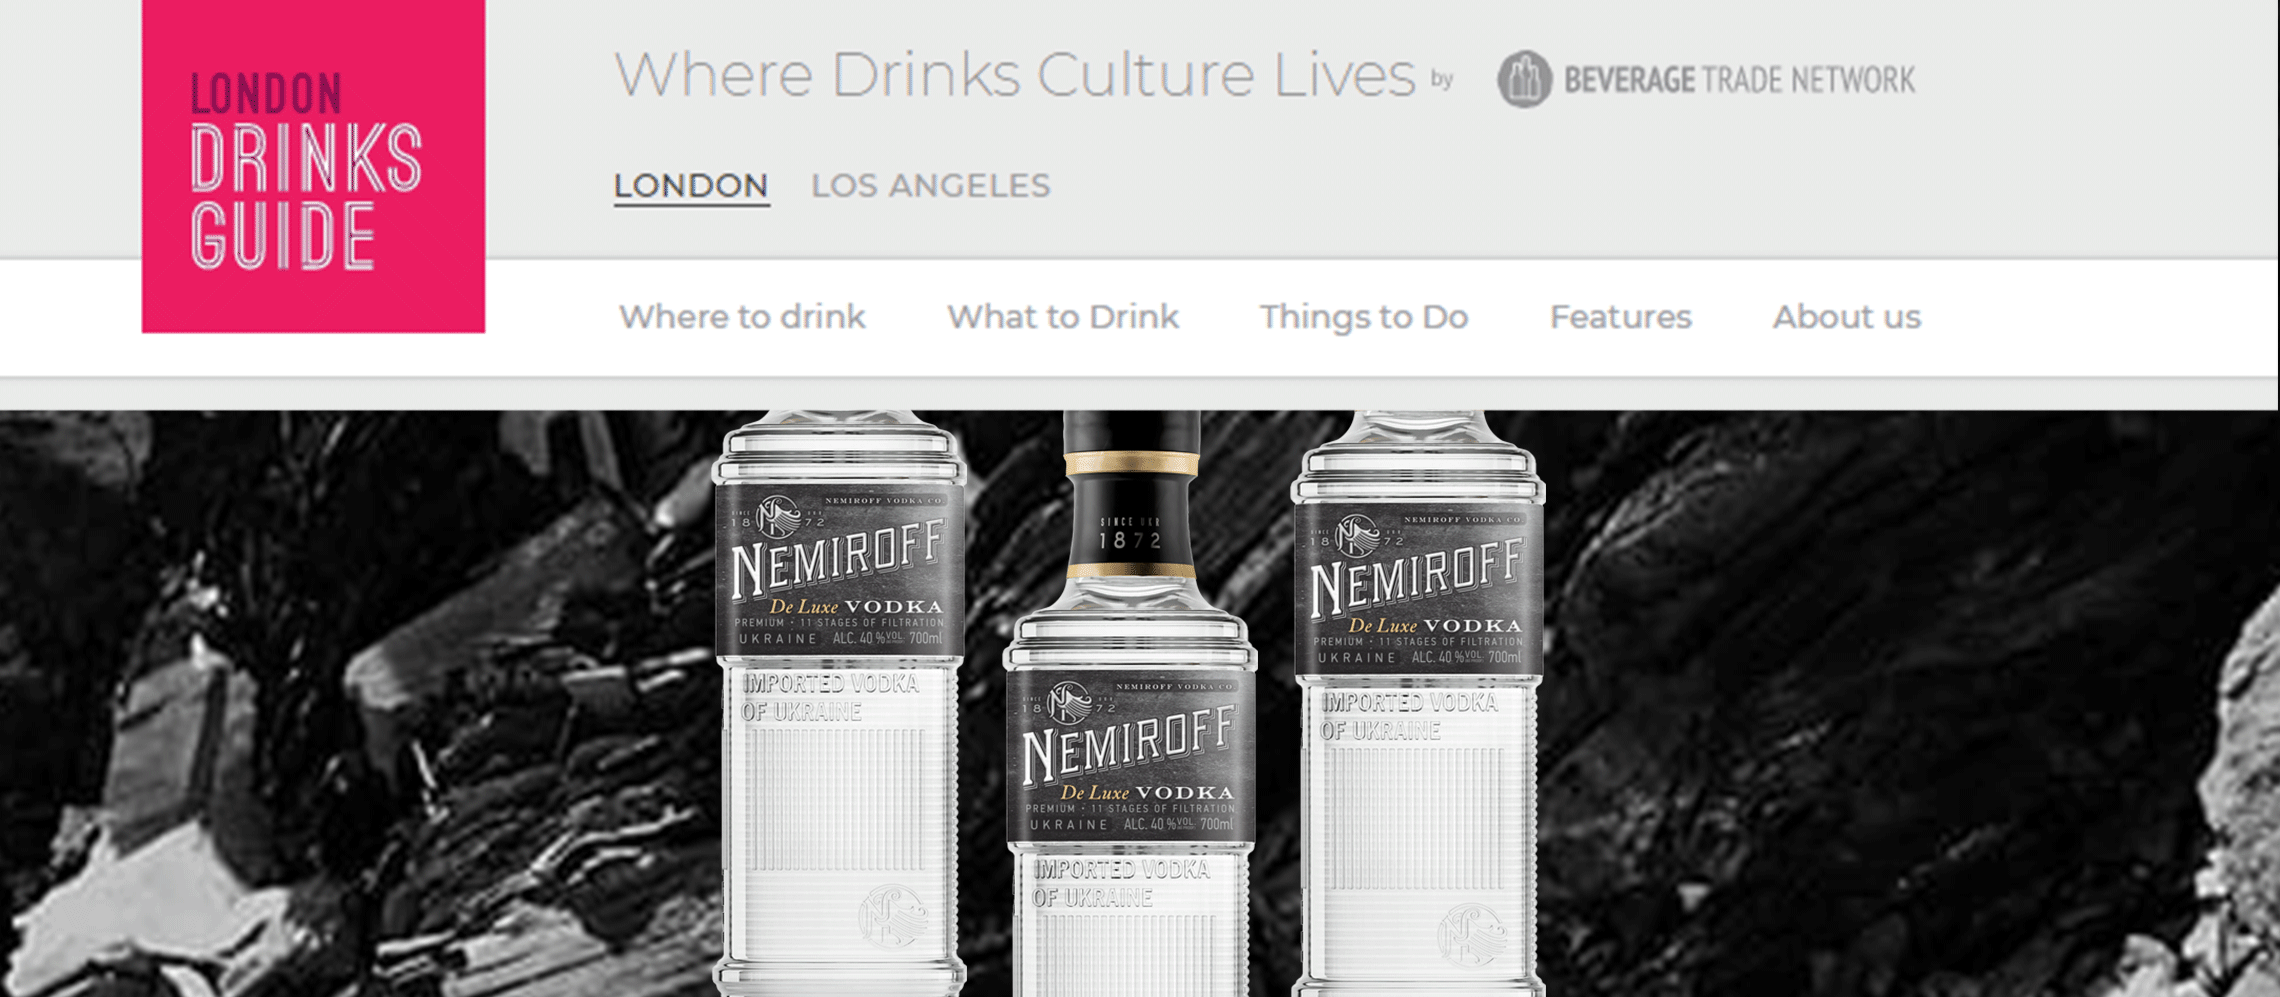 Photo for: Nemiroff Vodka - A Brand With A 150-Year History